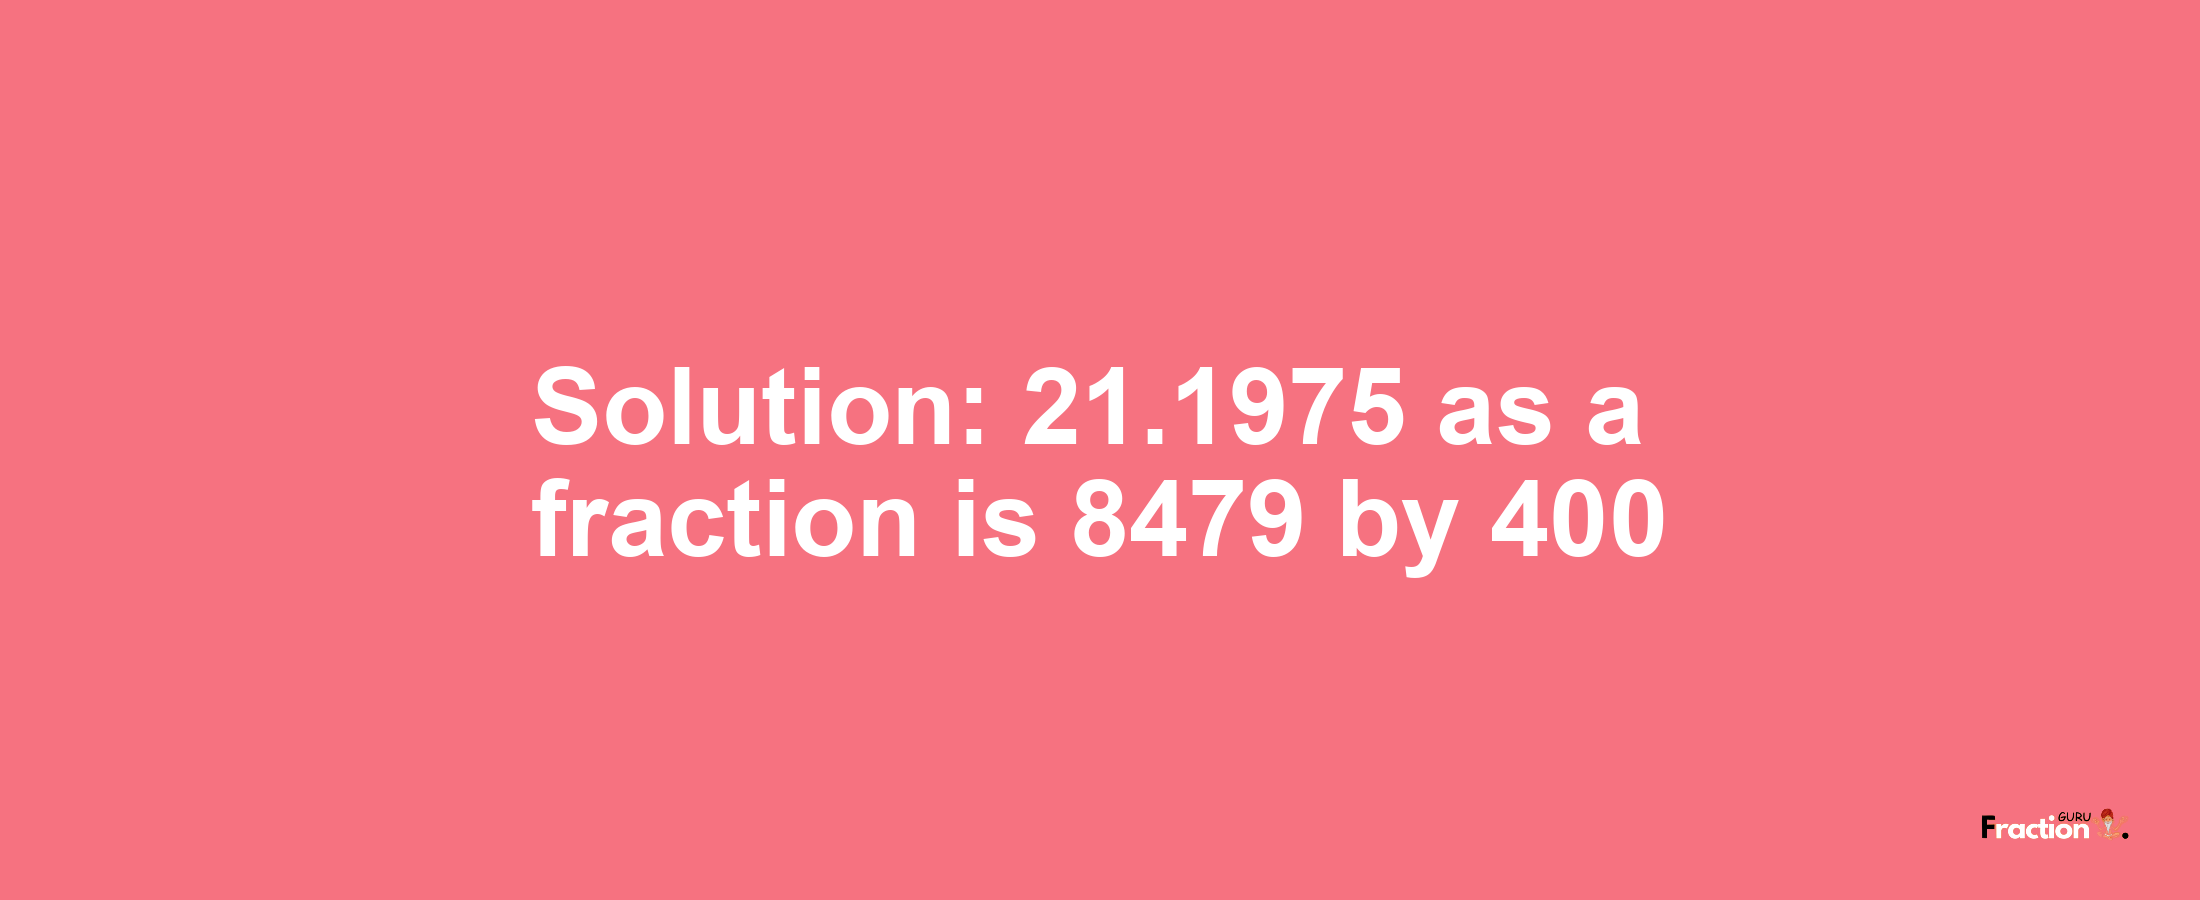 Solution:21.1975 as a fraction is 8479/400